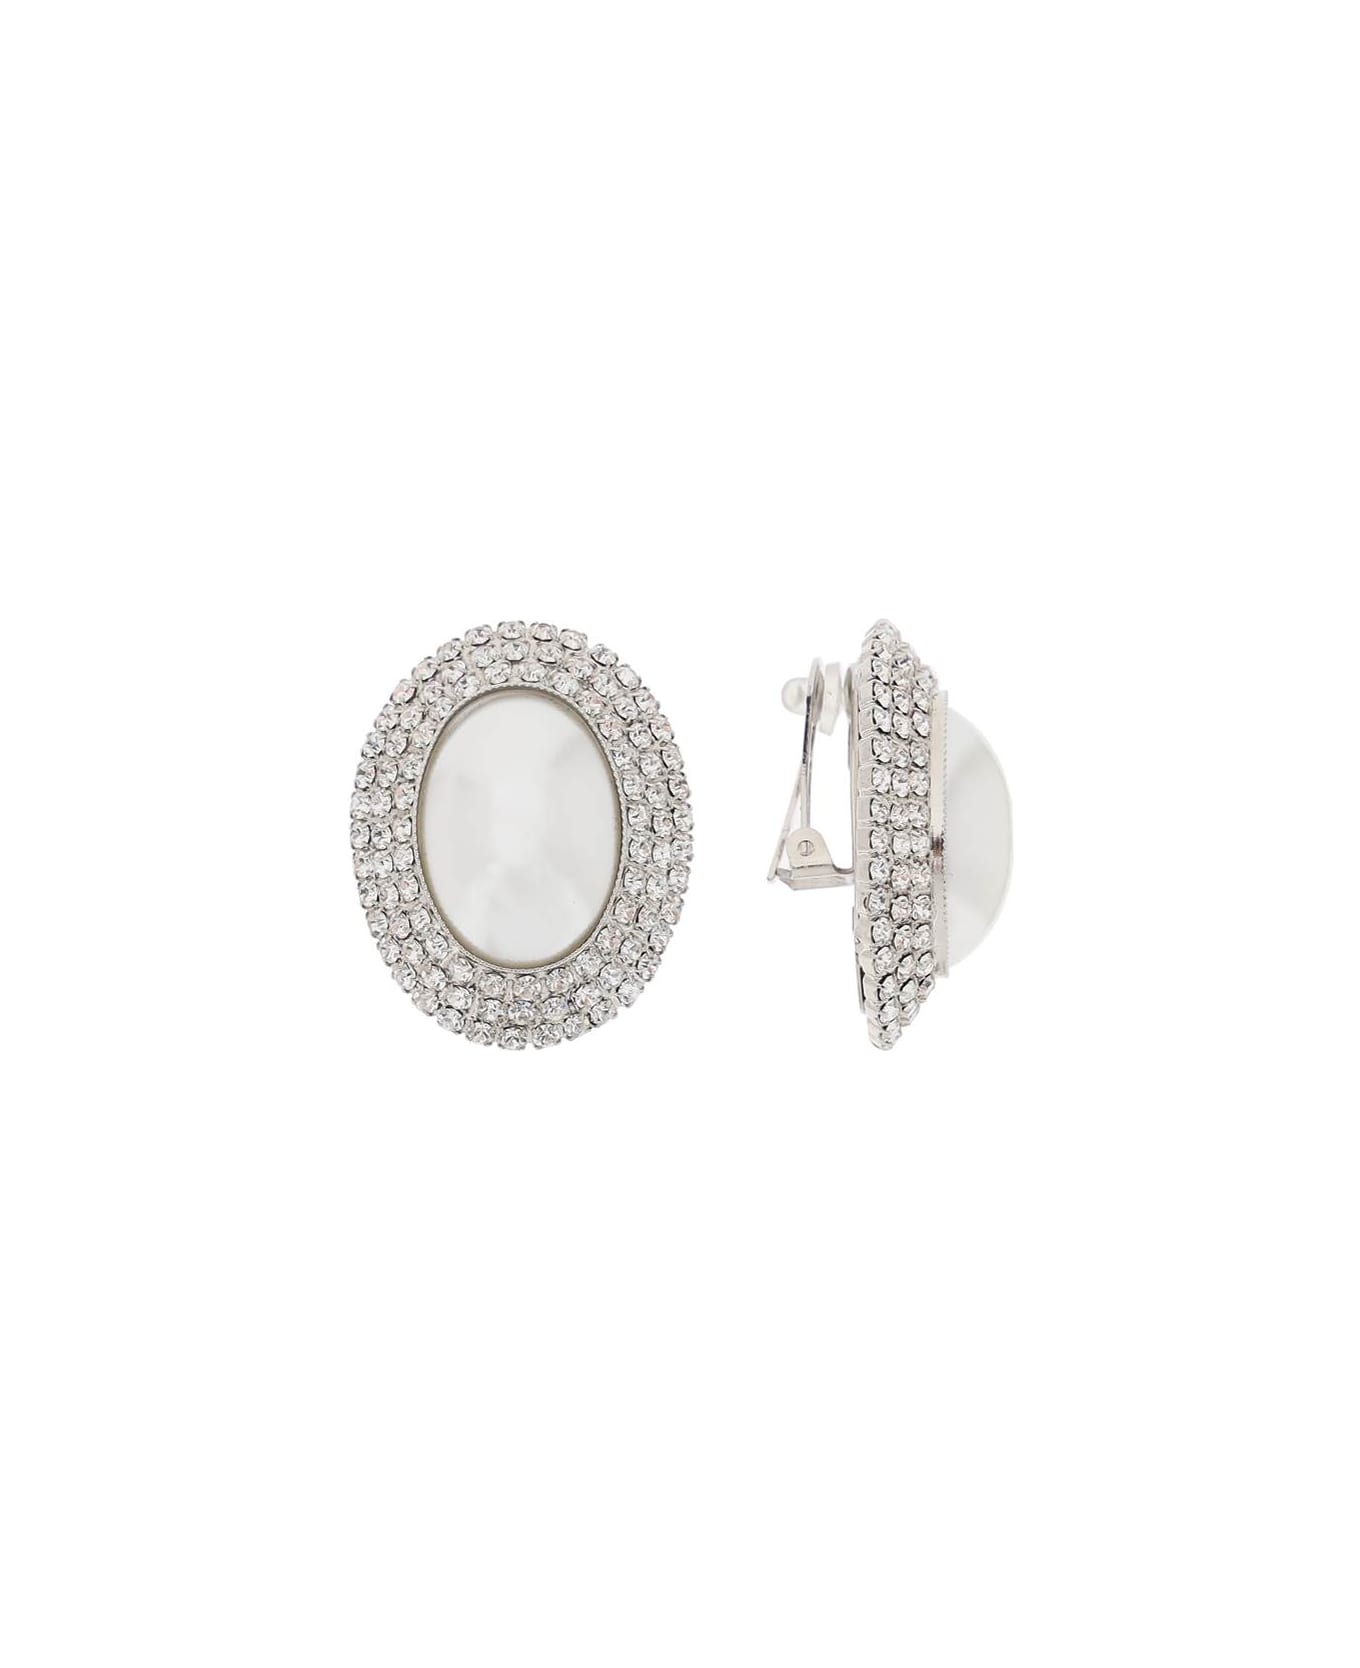 Alessandra Rich Oval With Pearl Earrings - Cry silver